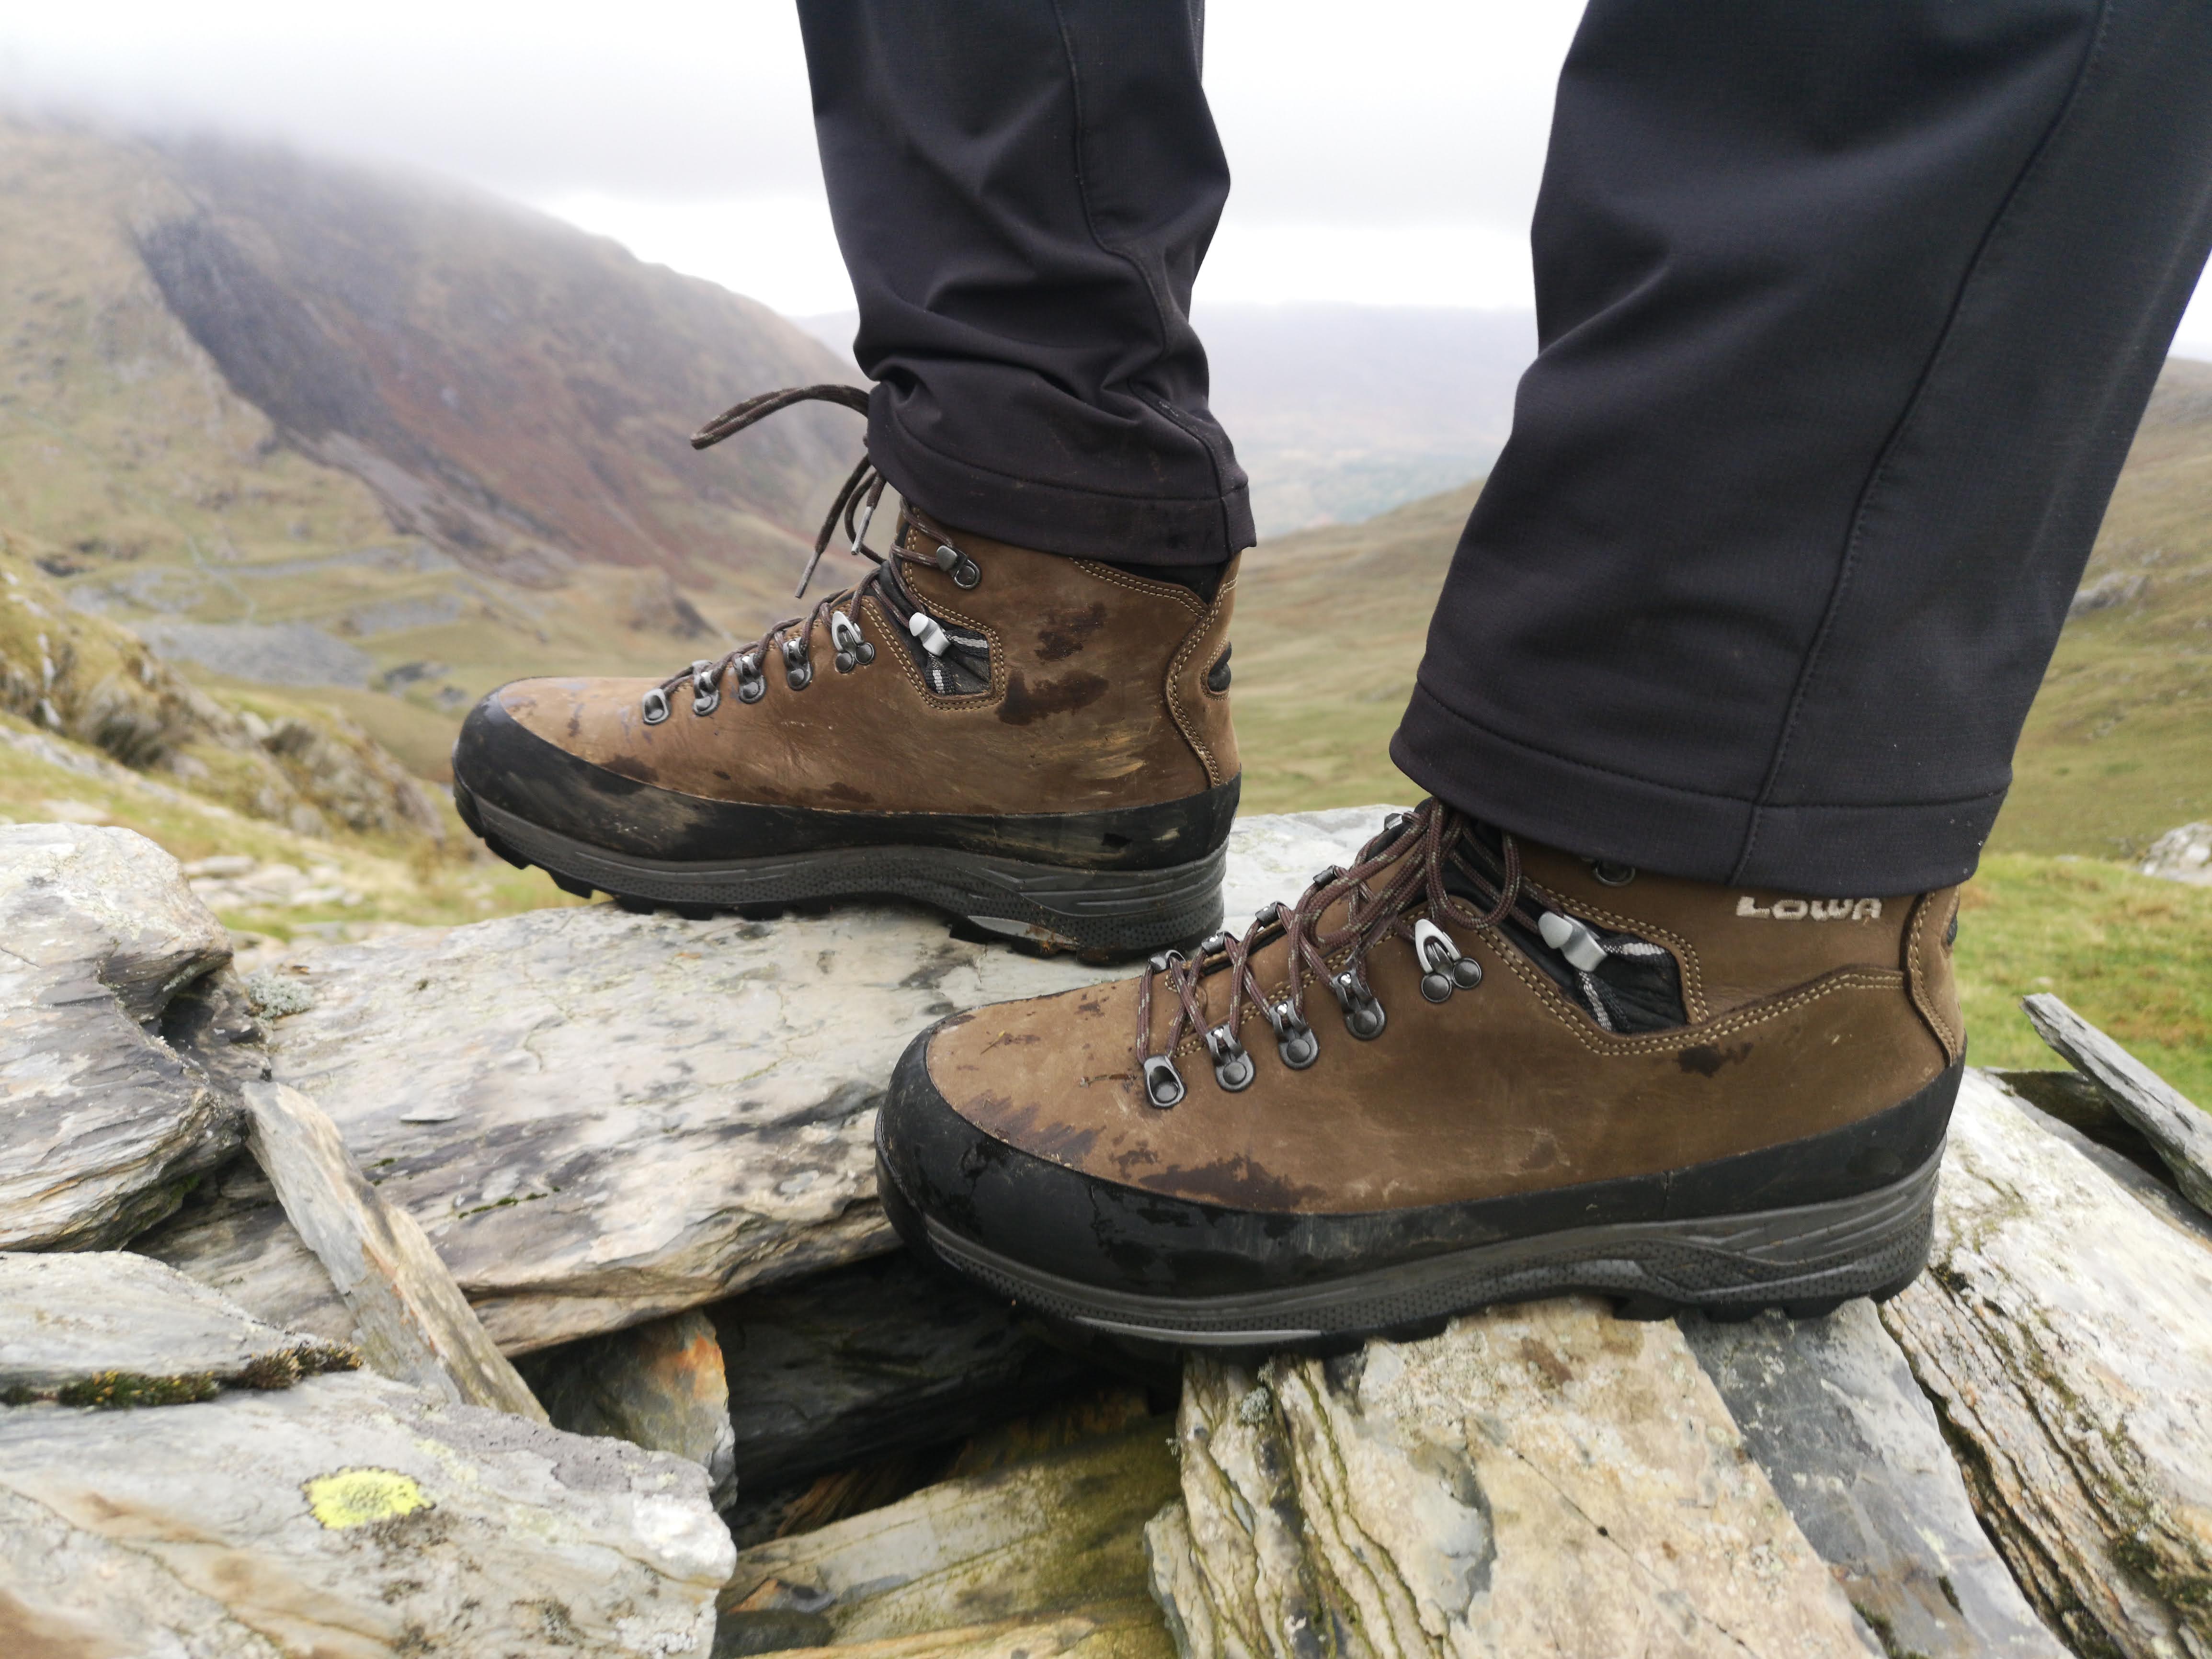 Lowa Tibet GTX boot review: Honest and workhorse | T3